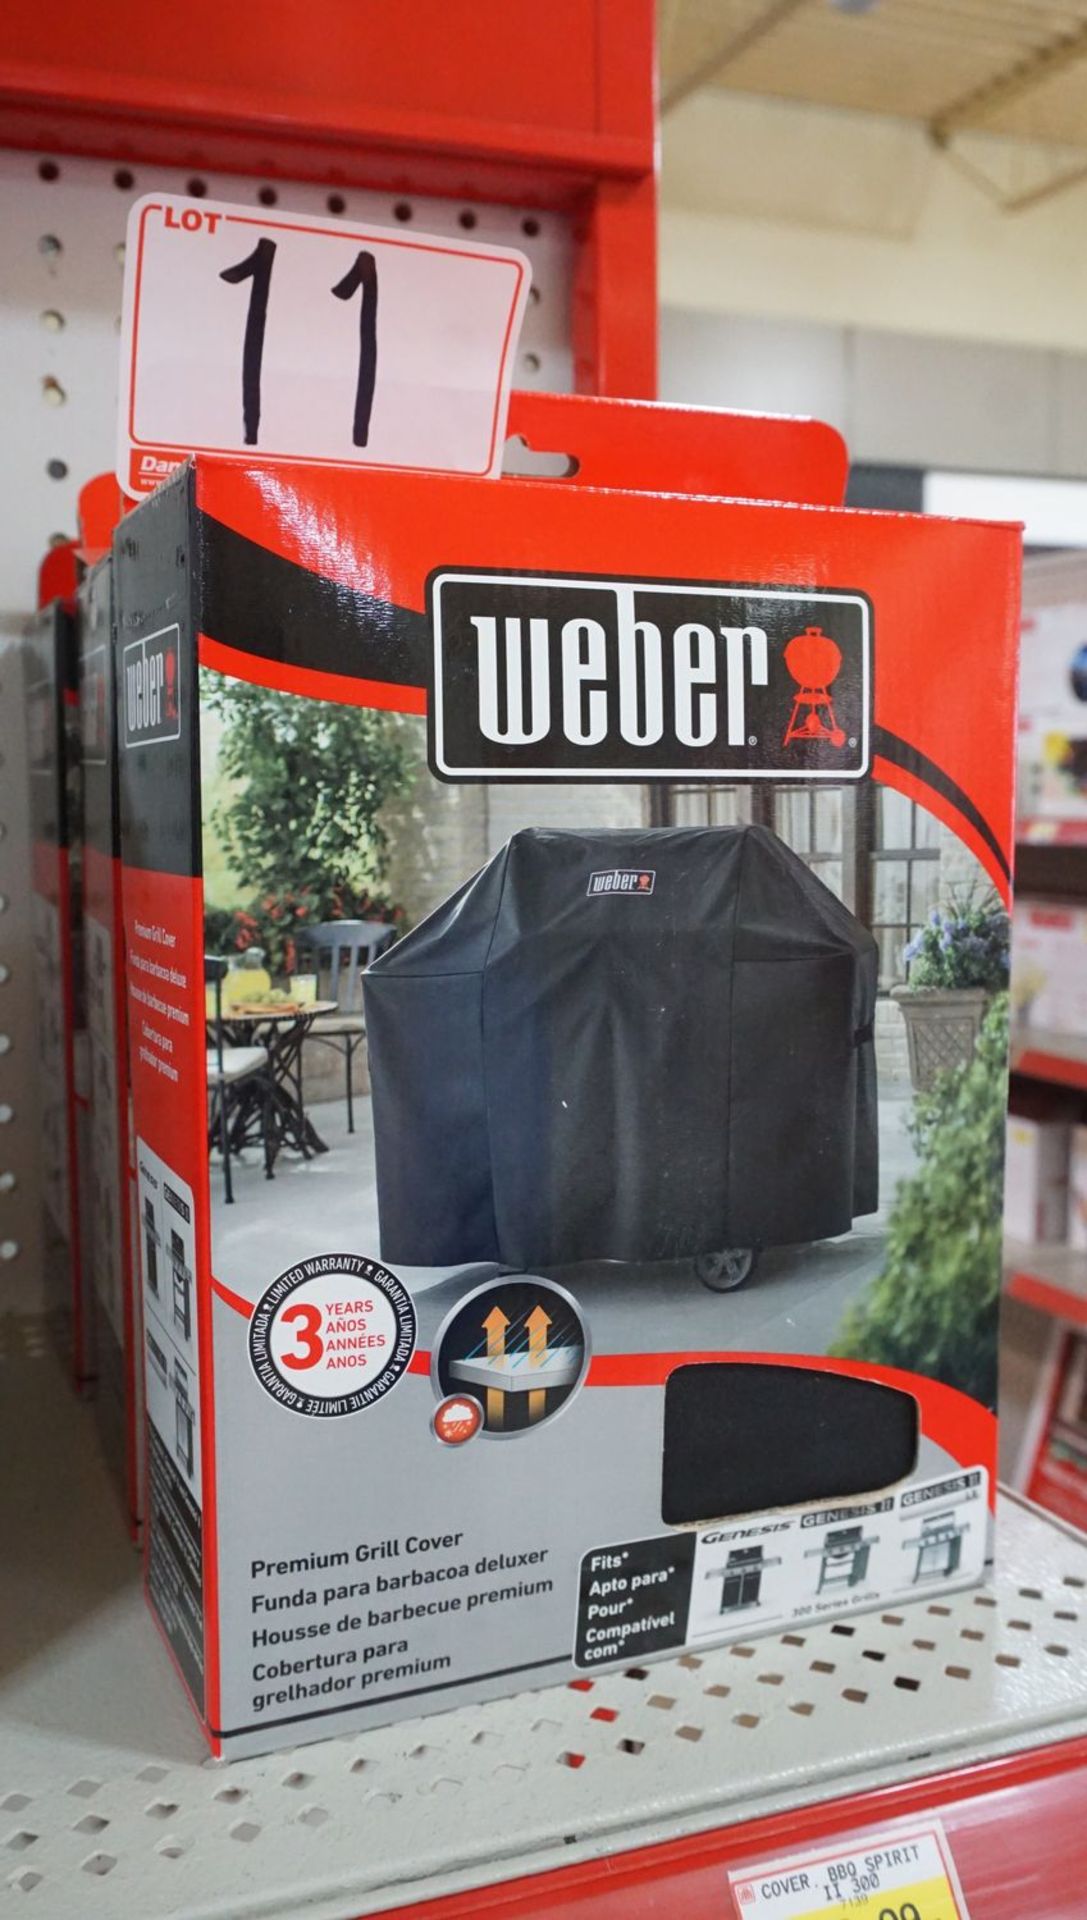 UNITS - WEBER PREMIUM GRILL COVERS